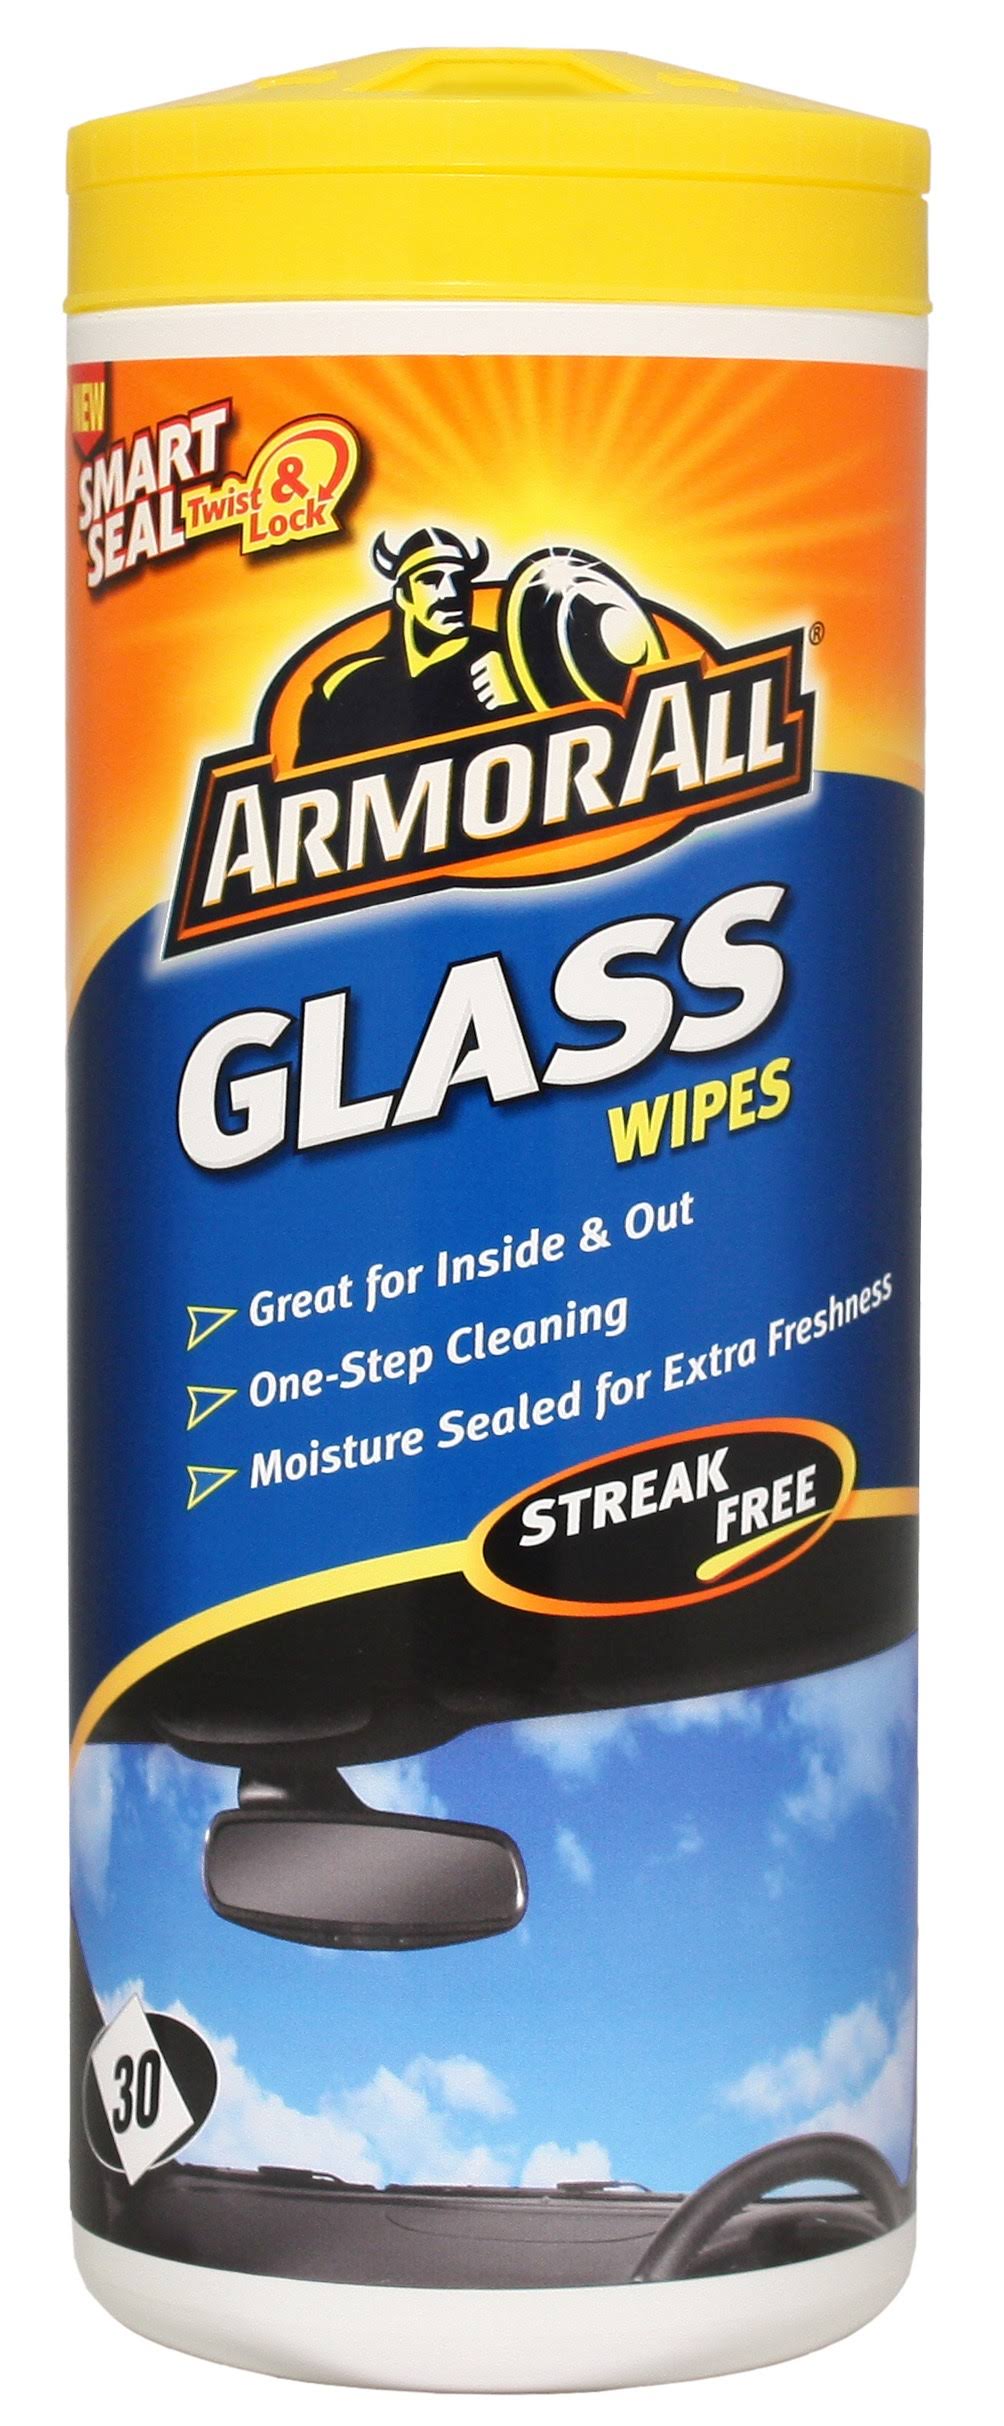 Armor All Glass Cleaning Wipes